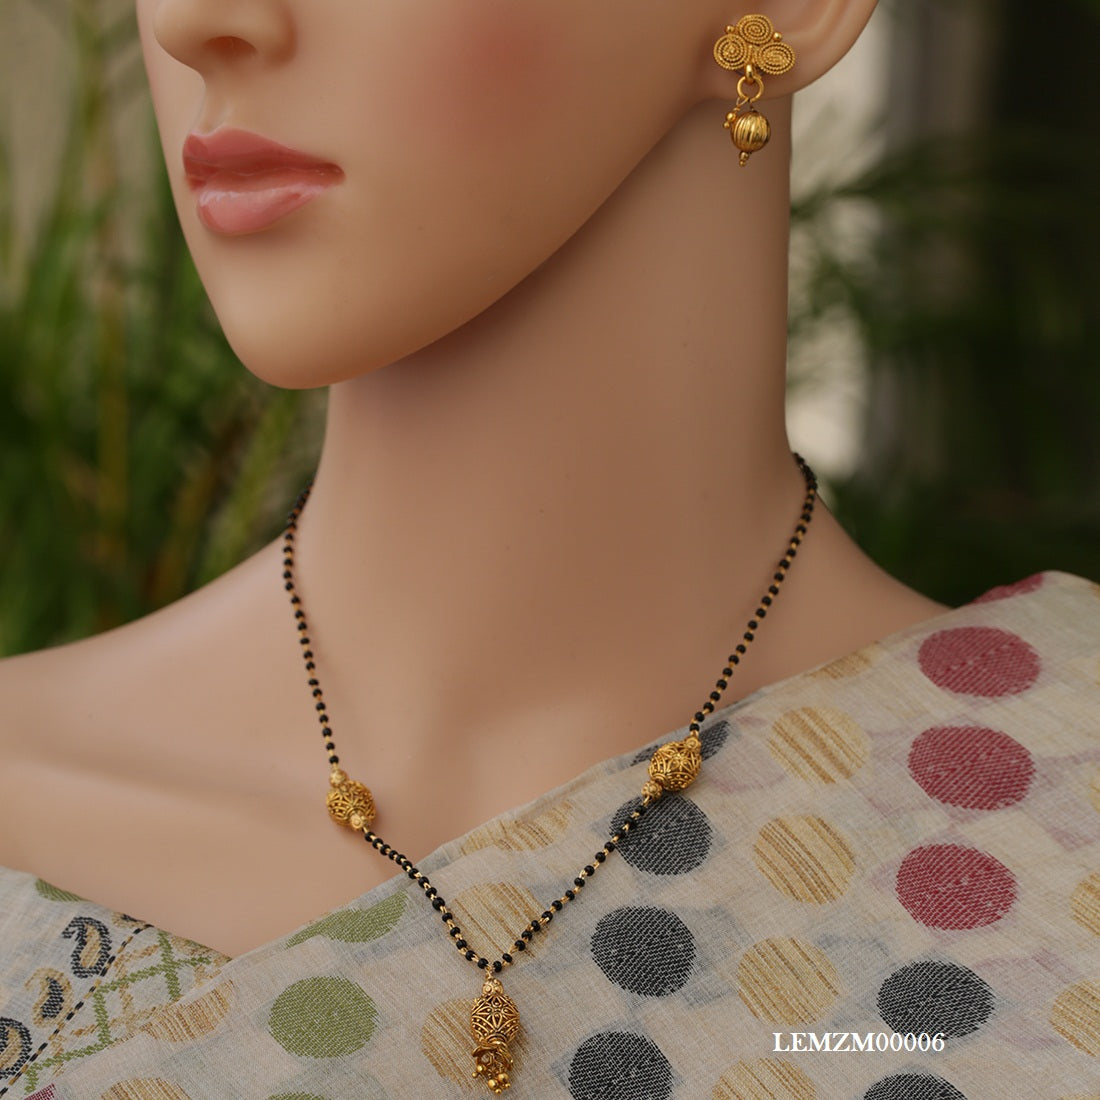 Traditional New Look Gold Chain Artificial Mangalsutra